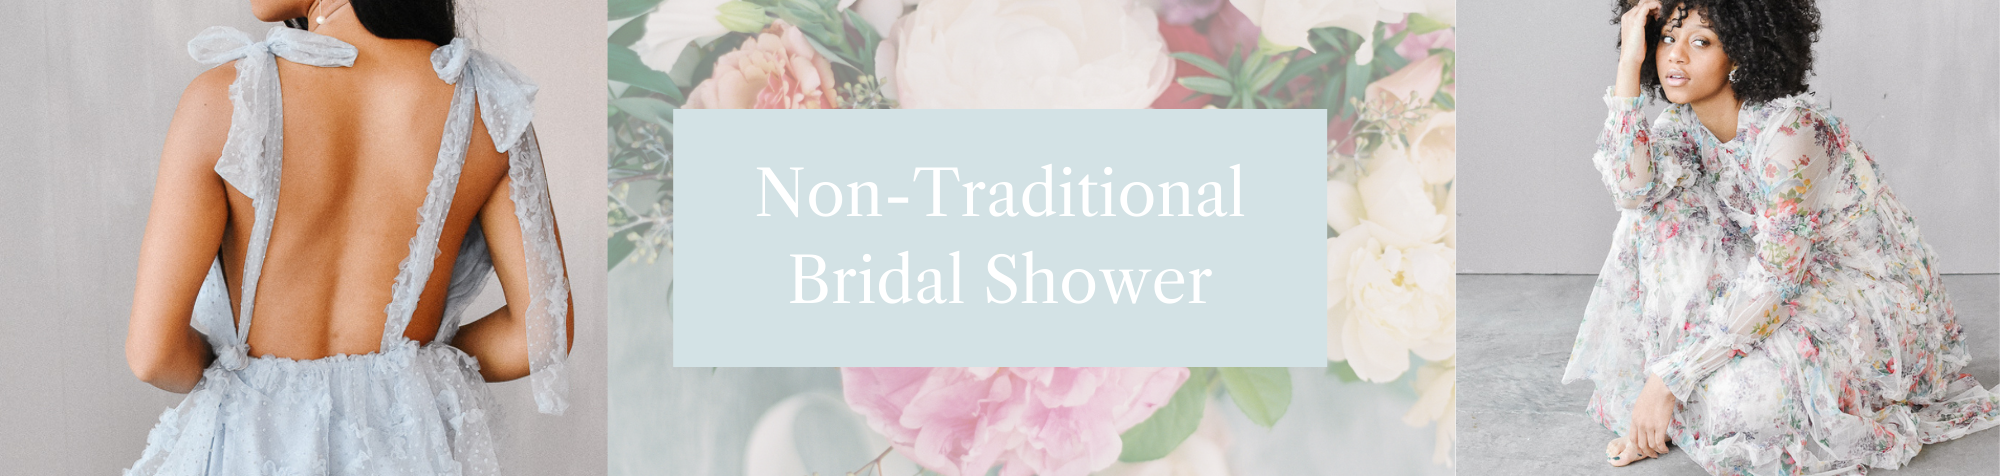 Non-Traditional Bridal Shower Looks